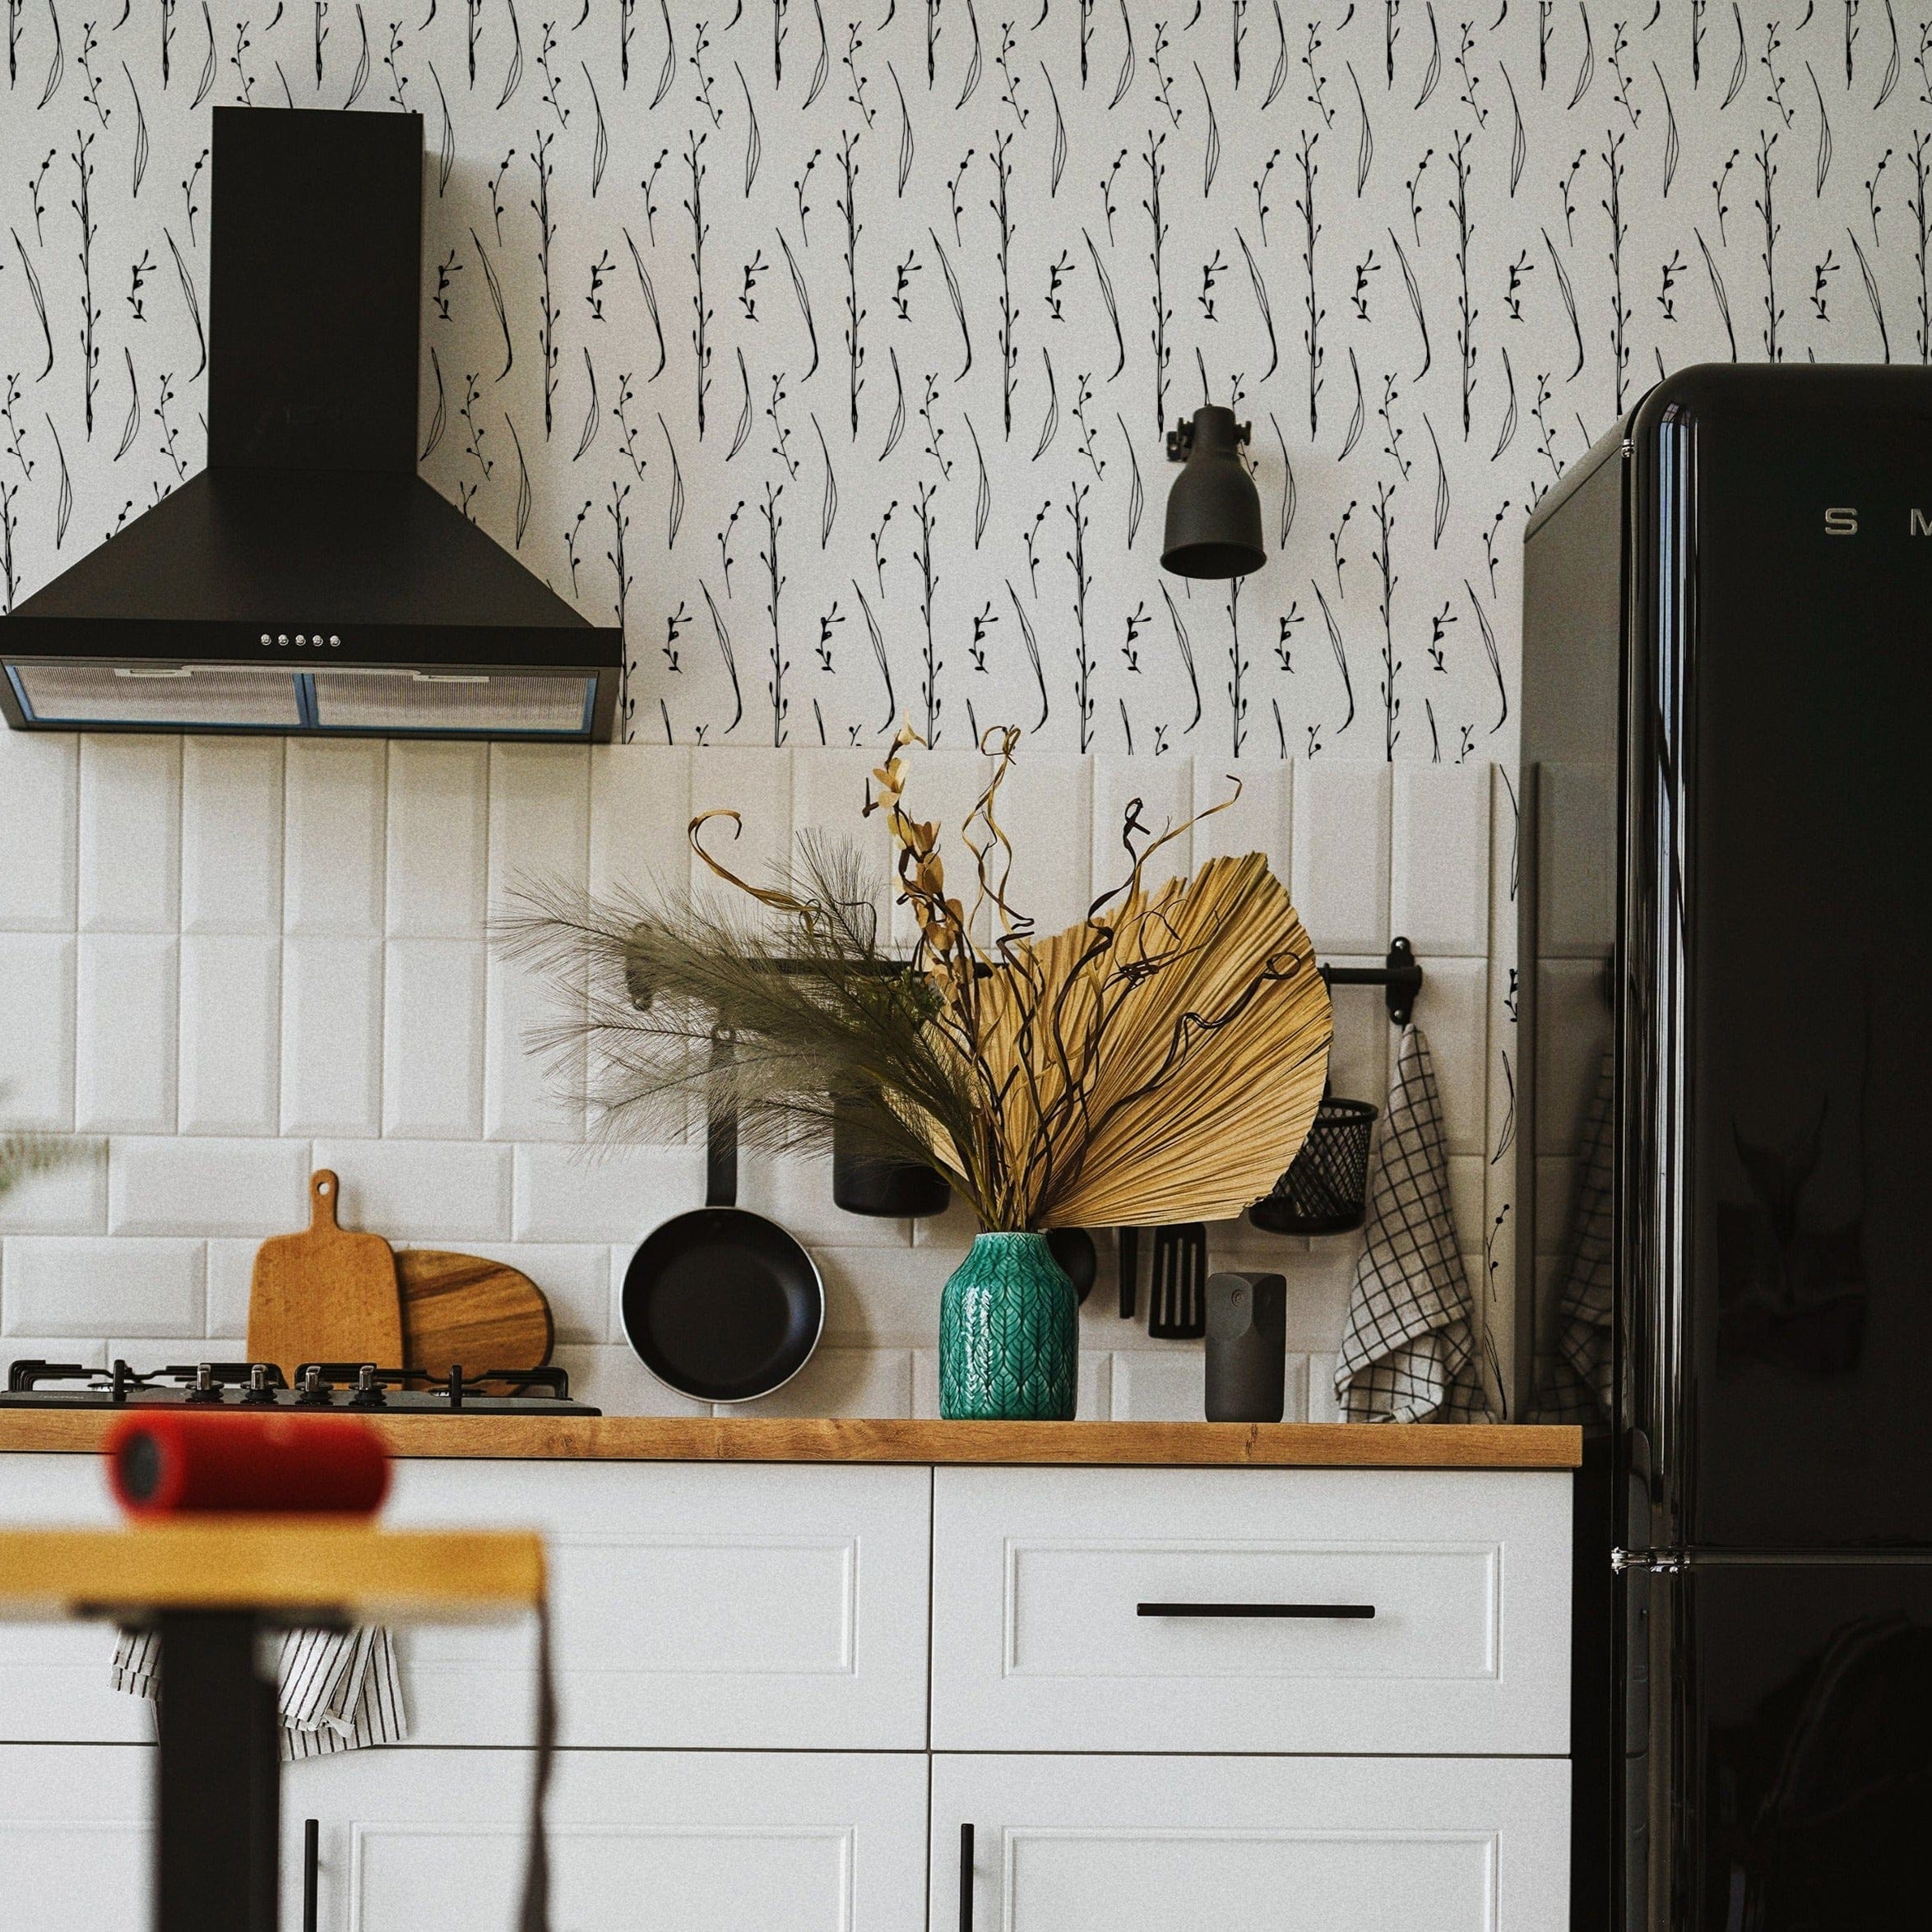 A modern kitchen featuring Twig & Leaf Wallpaper with a black and white pattern of twigs and leaves, adding a stylish touch to the white cabinets and black appliances.